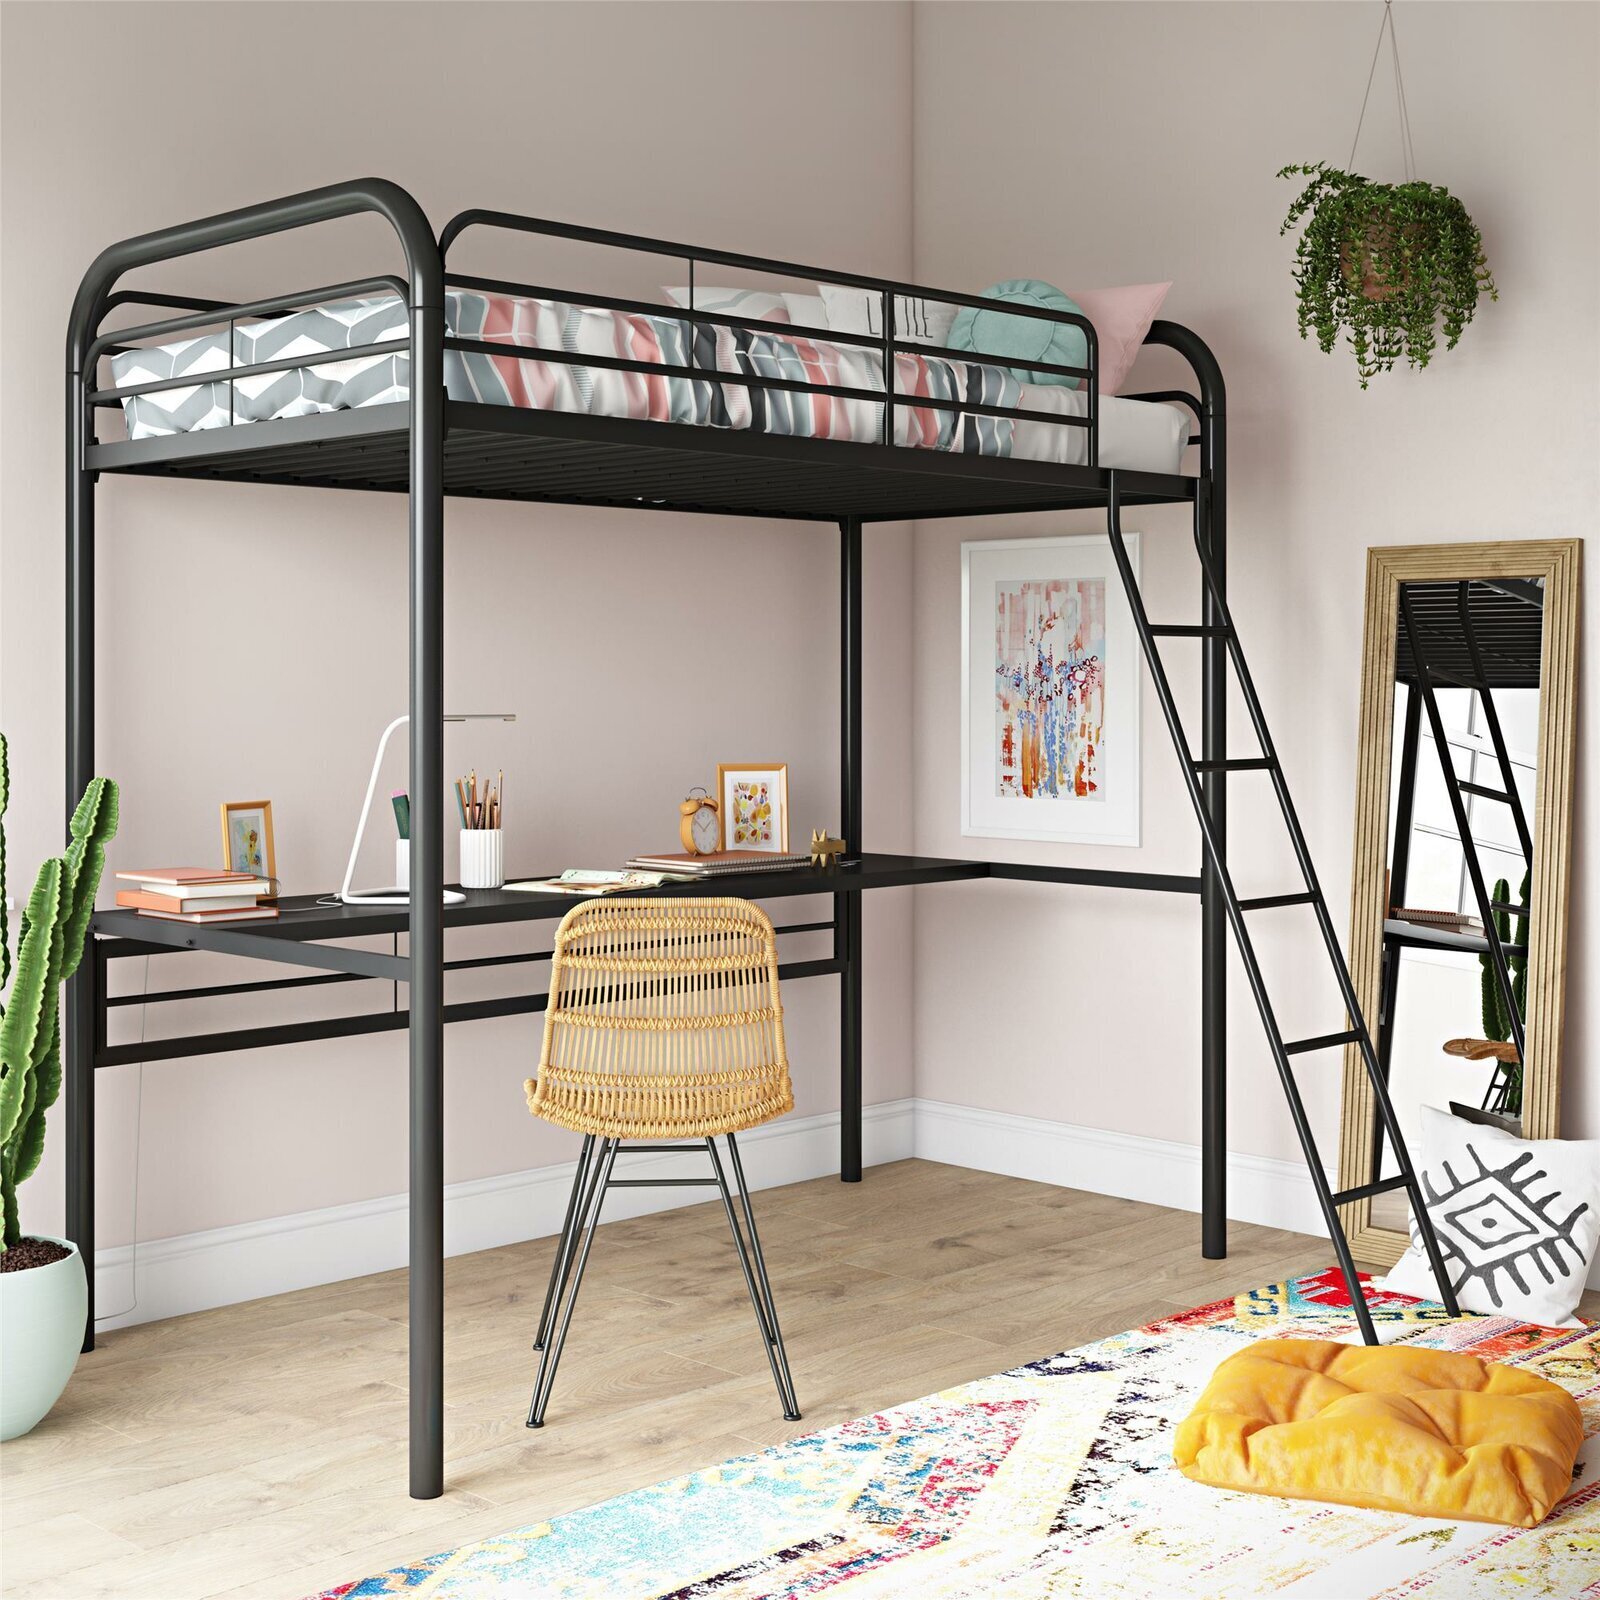 Clean, Stylish Loft Bed With Desk